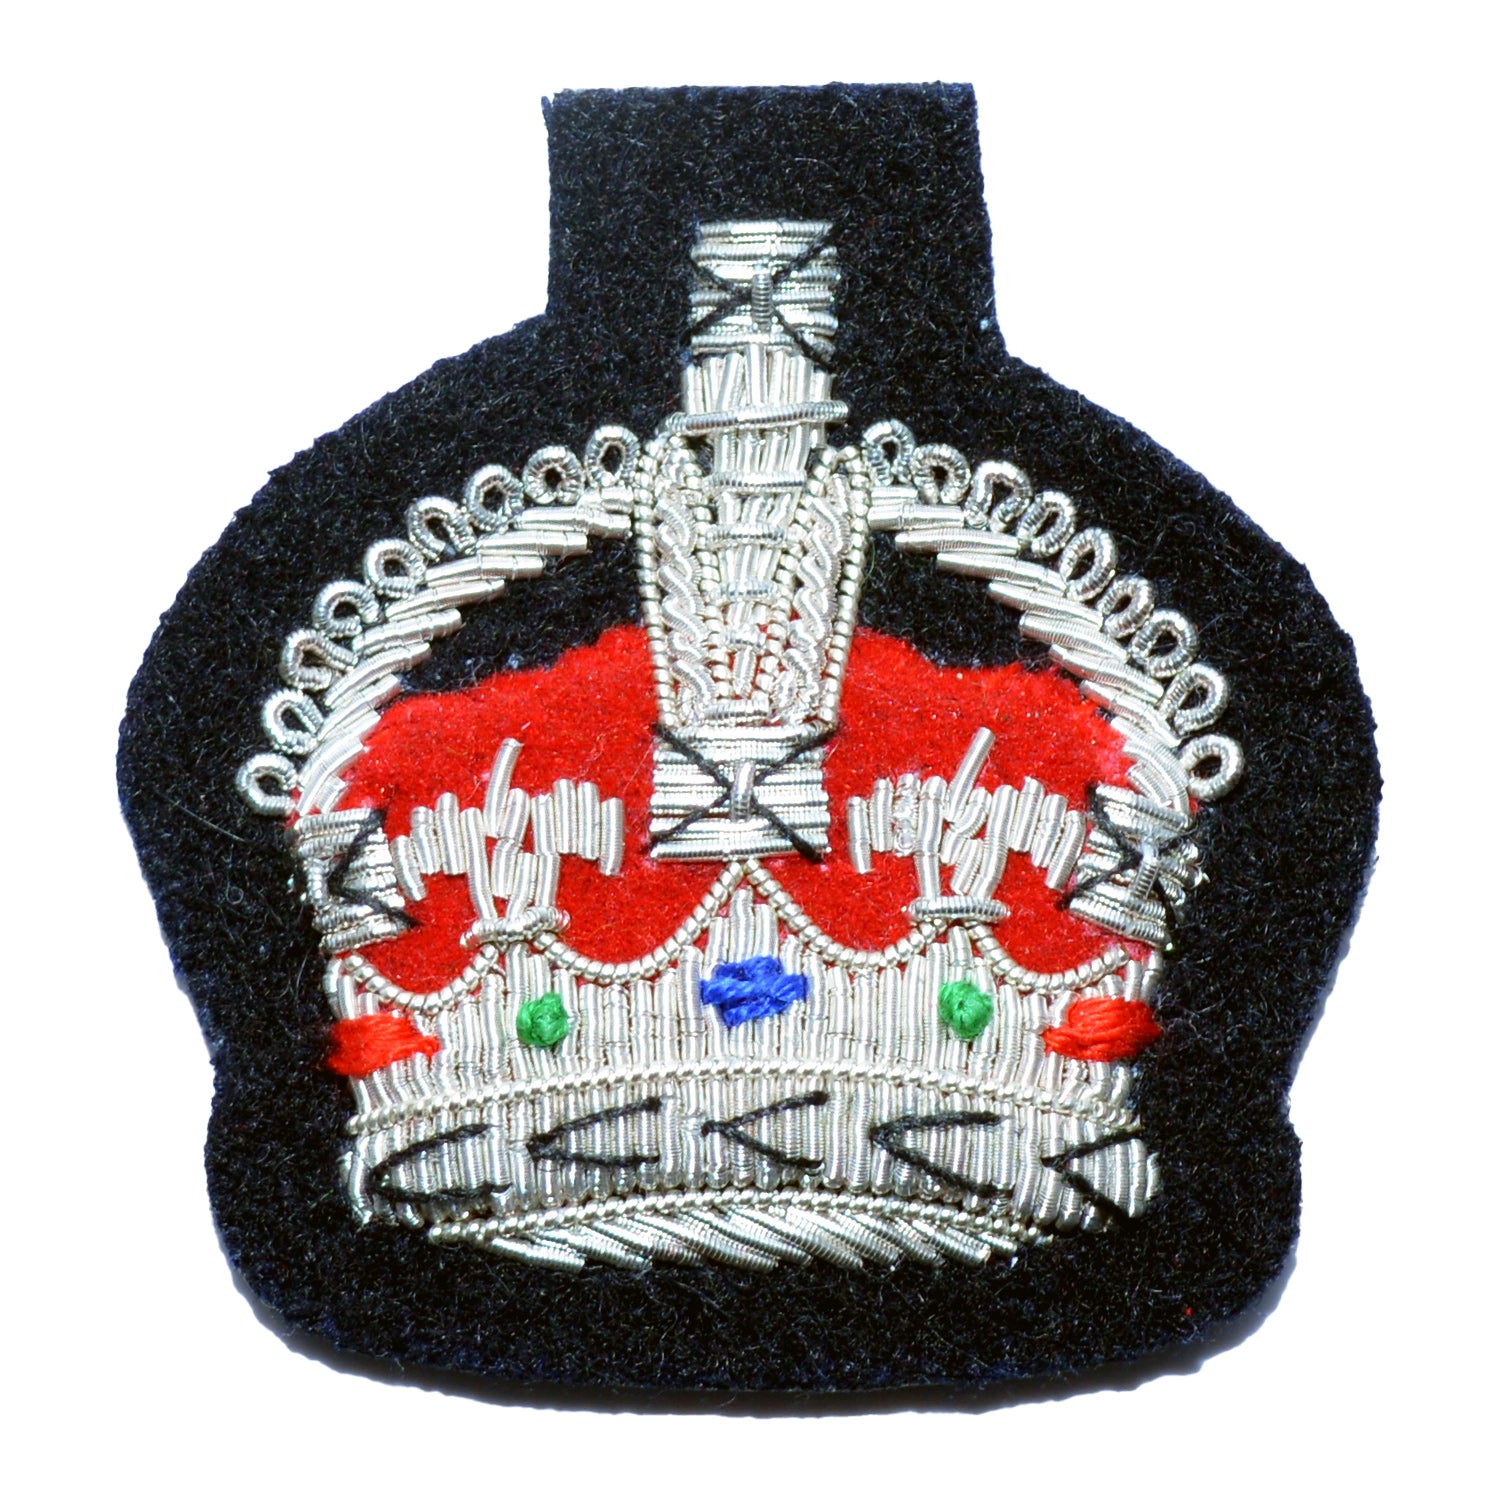 (King's Crown) Pipe-Majors and Scots Guards Small Crown Rank Badge Foot Guards British Army Badge